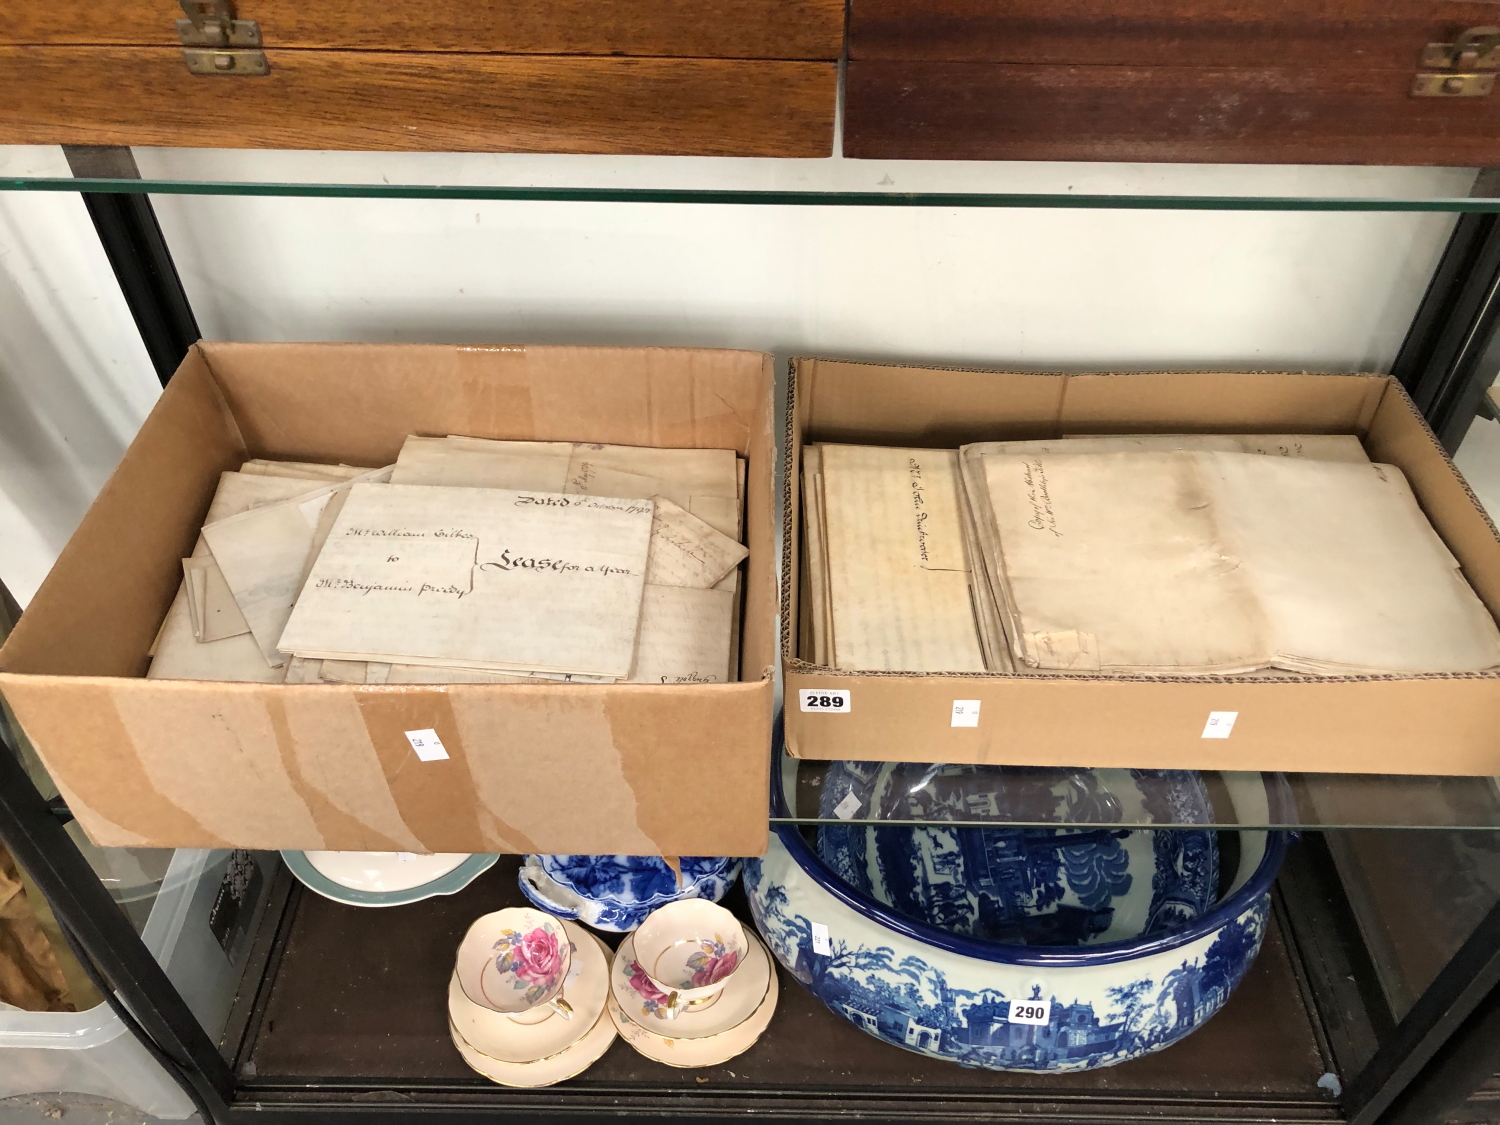 A LARGE COLLECTION OF 18th AND 19th C. LEGAL DOCUMENTS